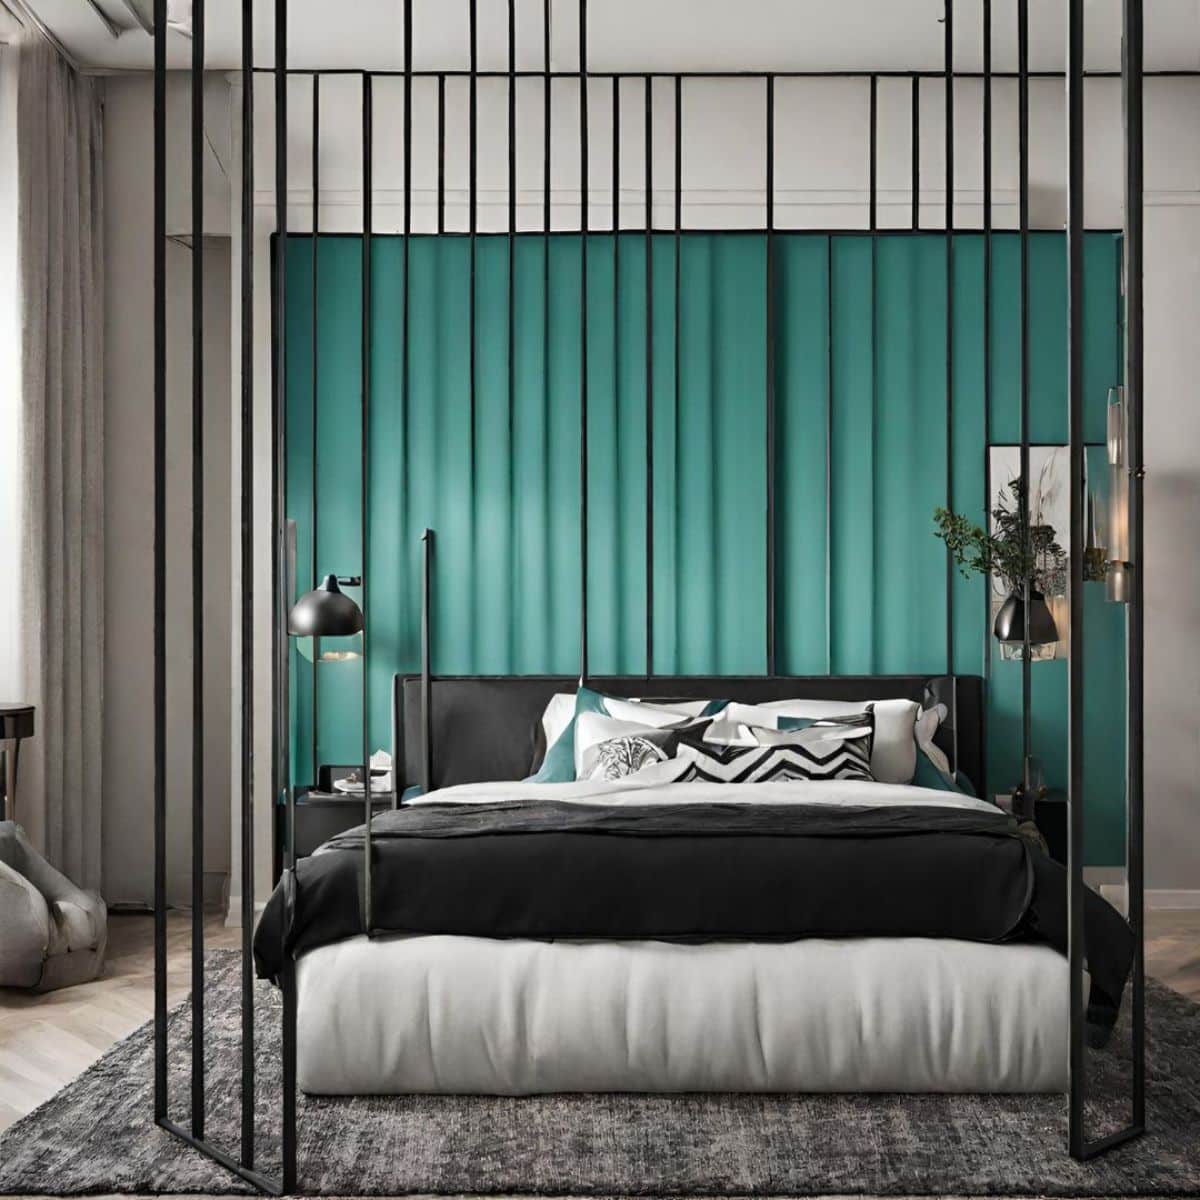 a bed surrounded by black posts against a teal wall